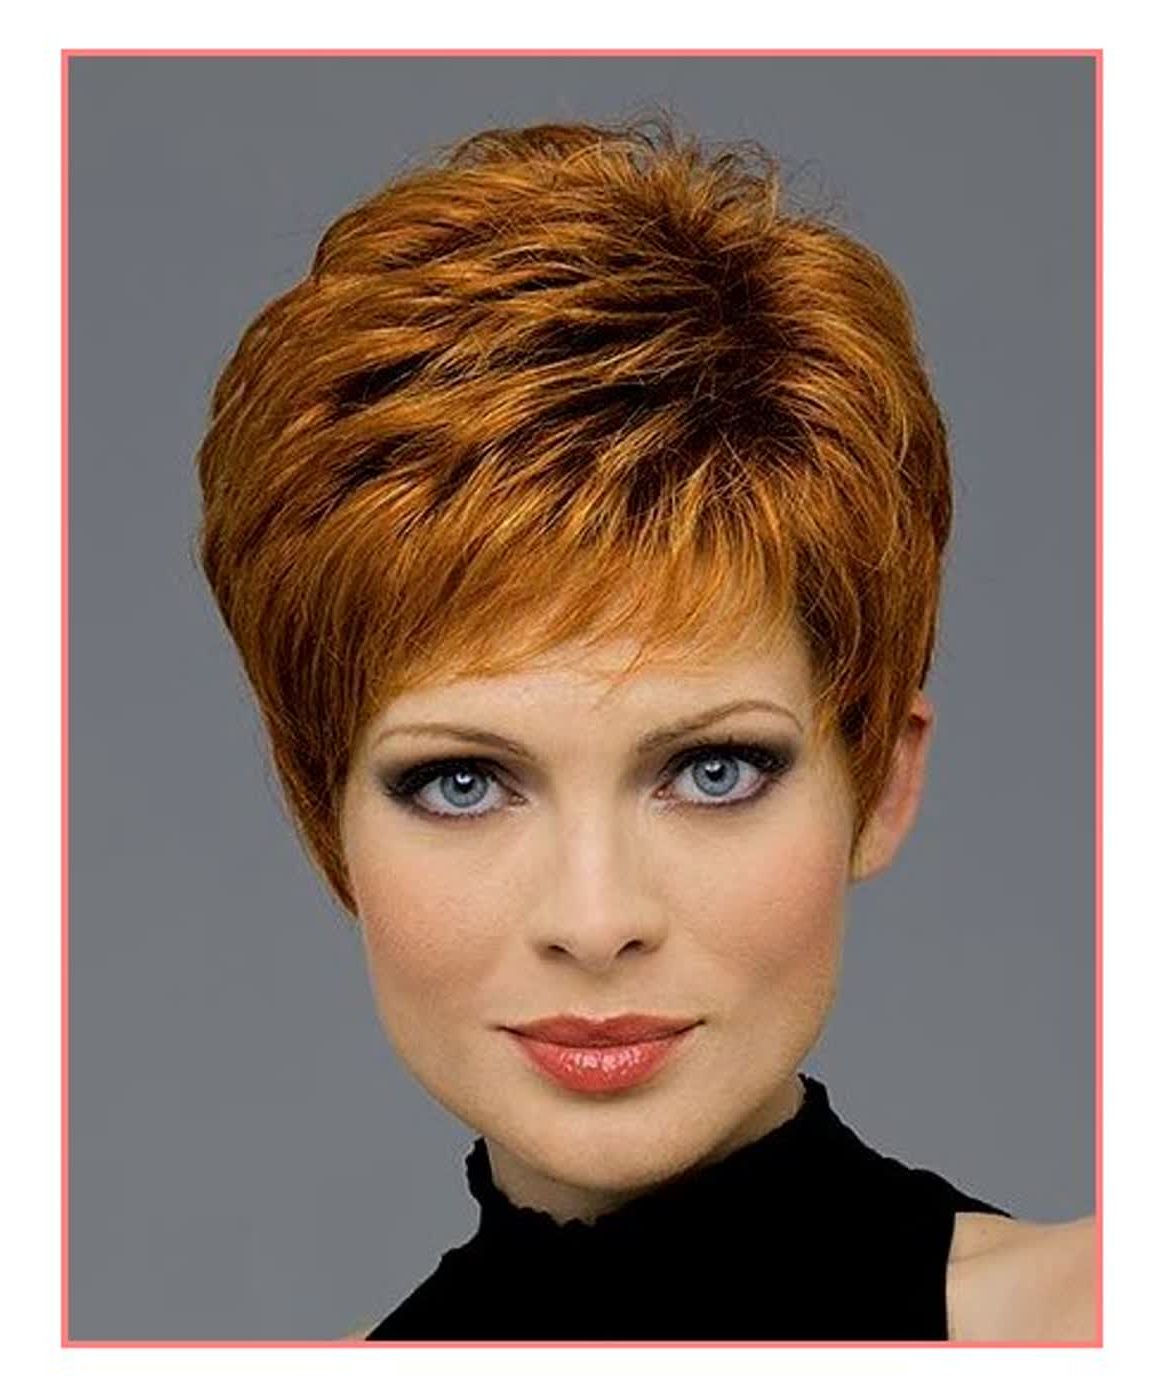 Ladies Hairstyles For Over 50s | Women Hairstyles Within Ladies Short Hairstyles For Over 50s (Photo 3 of 25)